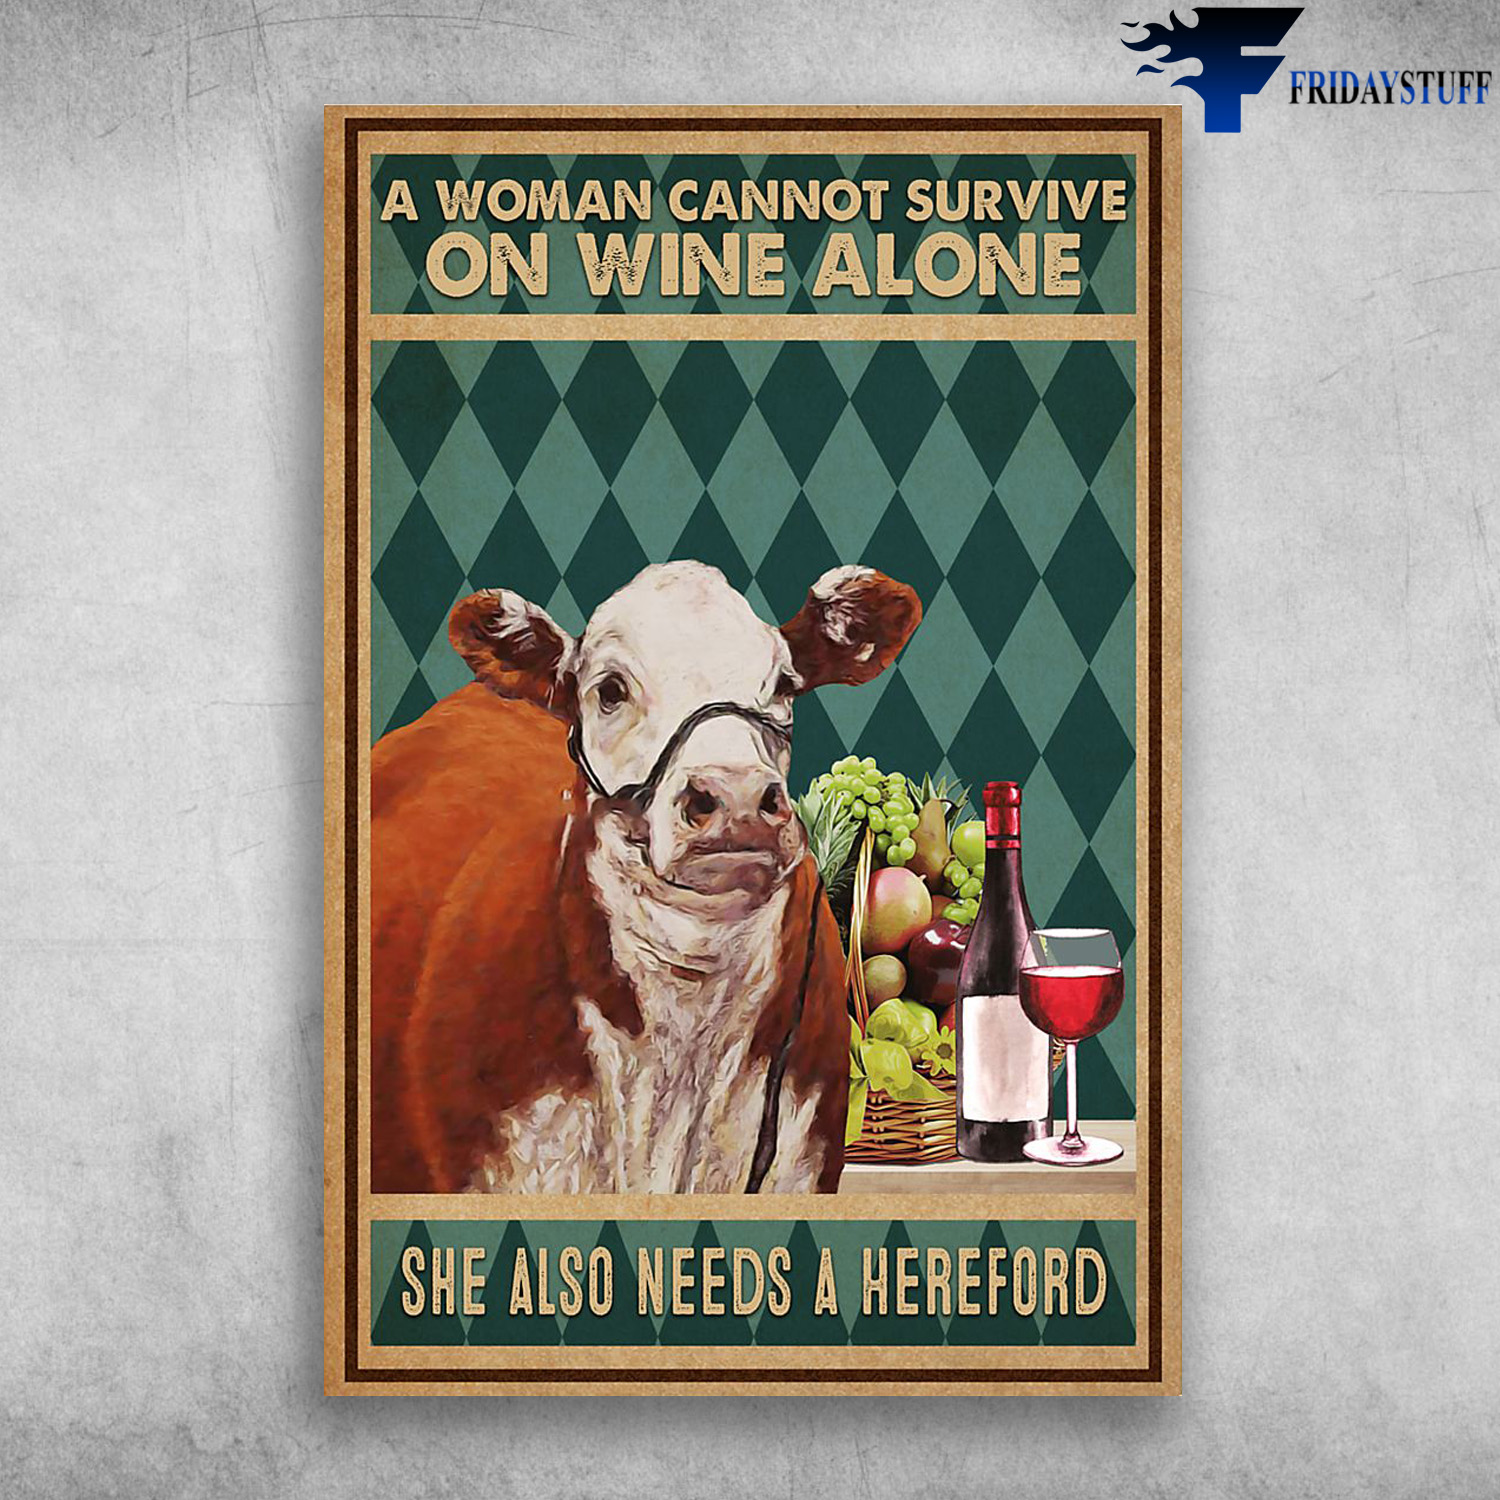 The Cow And Wine - A Woman Cannot Survive On Wine Alone, She Also Needs A Hereford